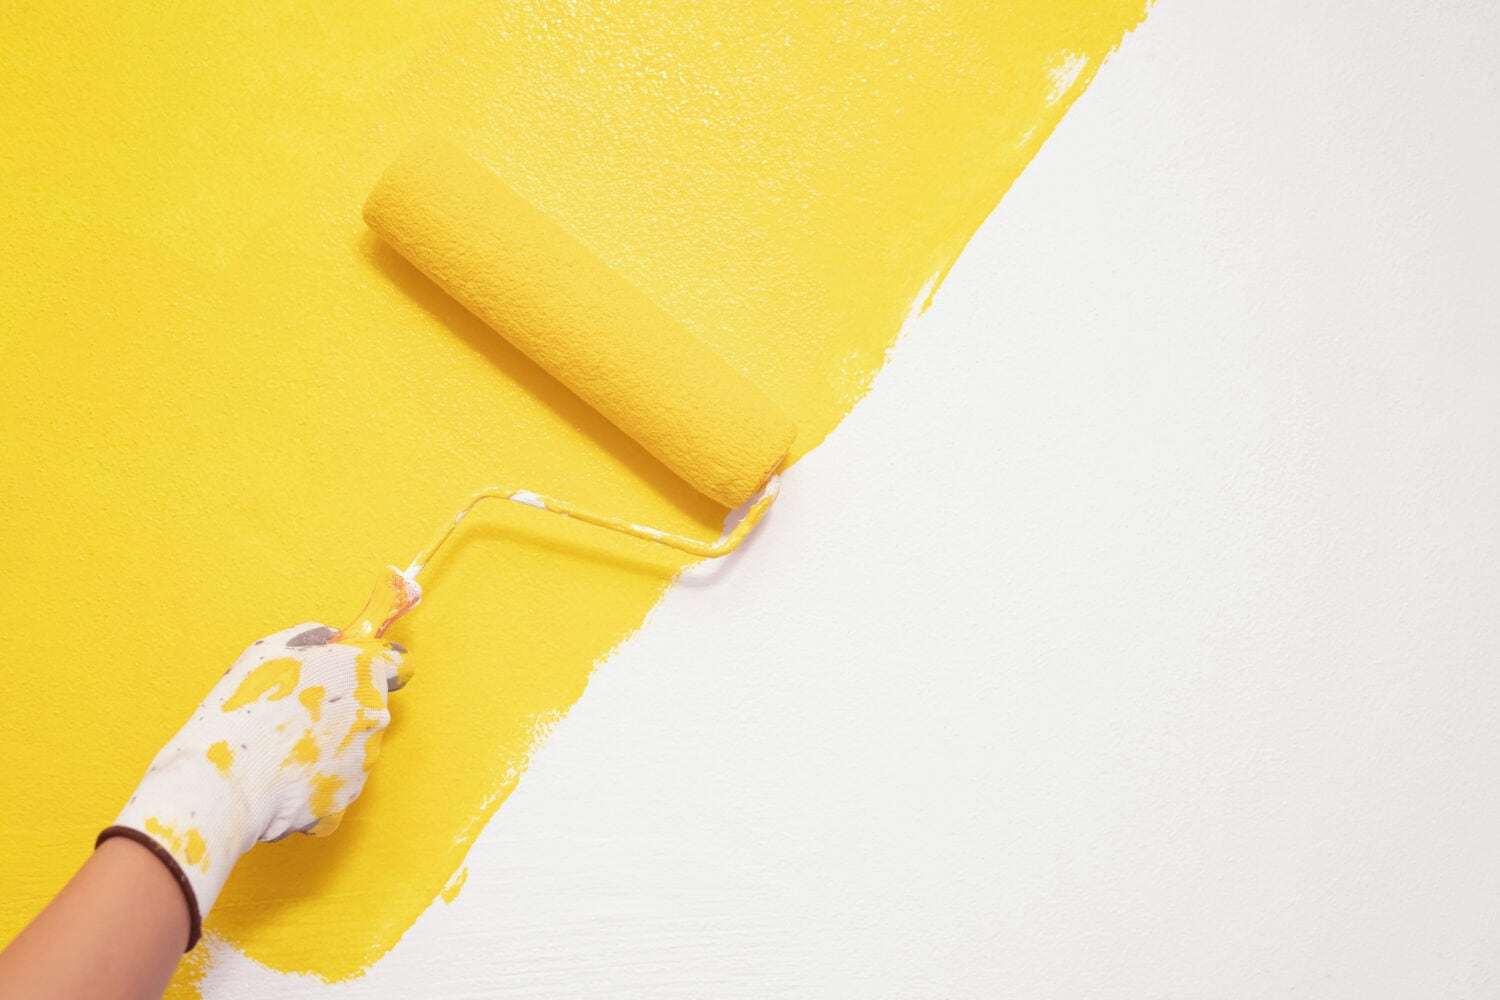 Roller Brush Painting, Worker painting on surface wall Painting apartment, renovating with yellow color paint. Leave empty copy space white to write descriptive text beside.